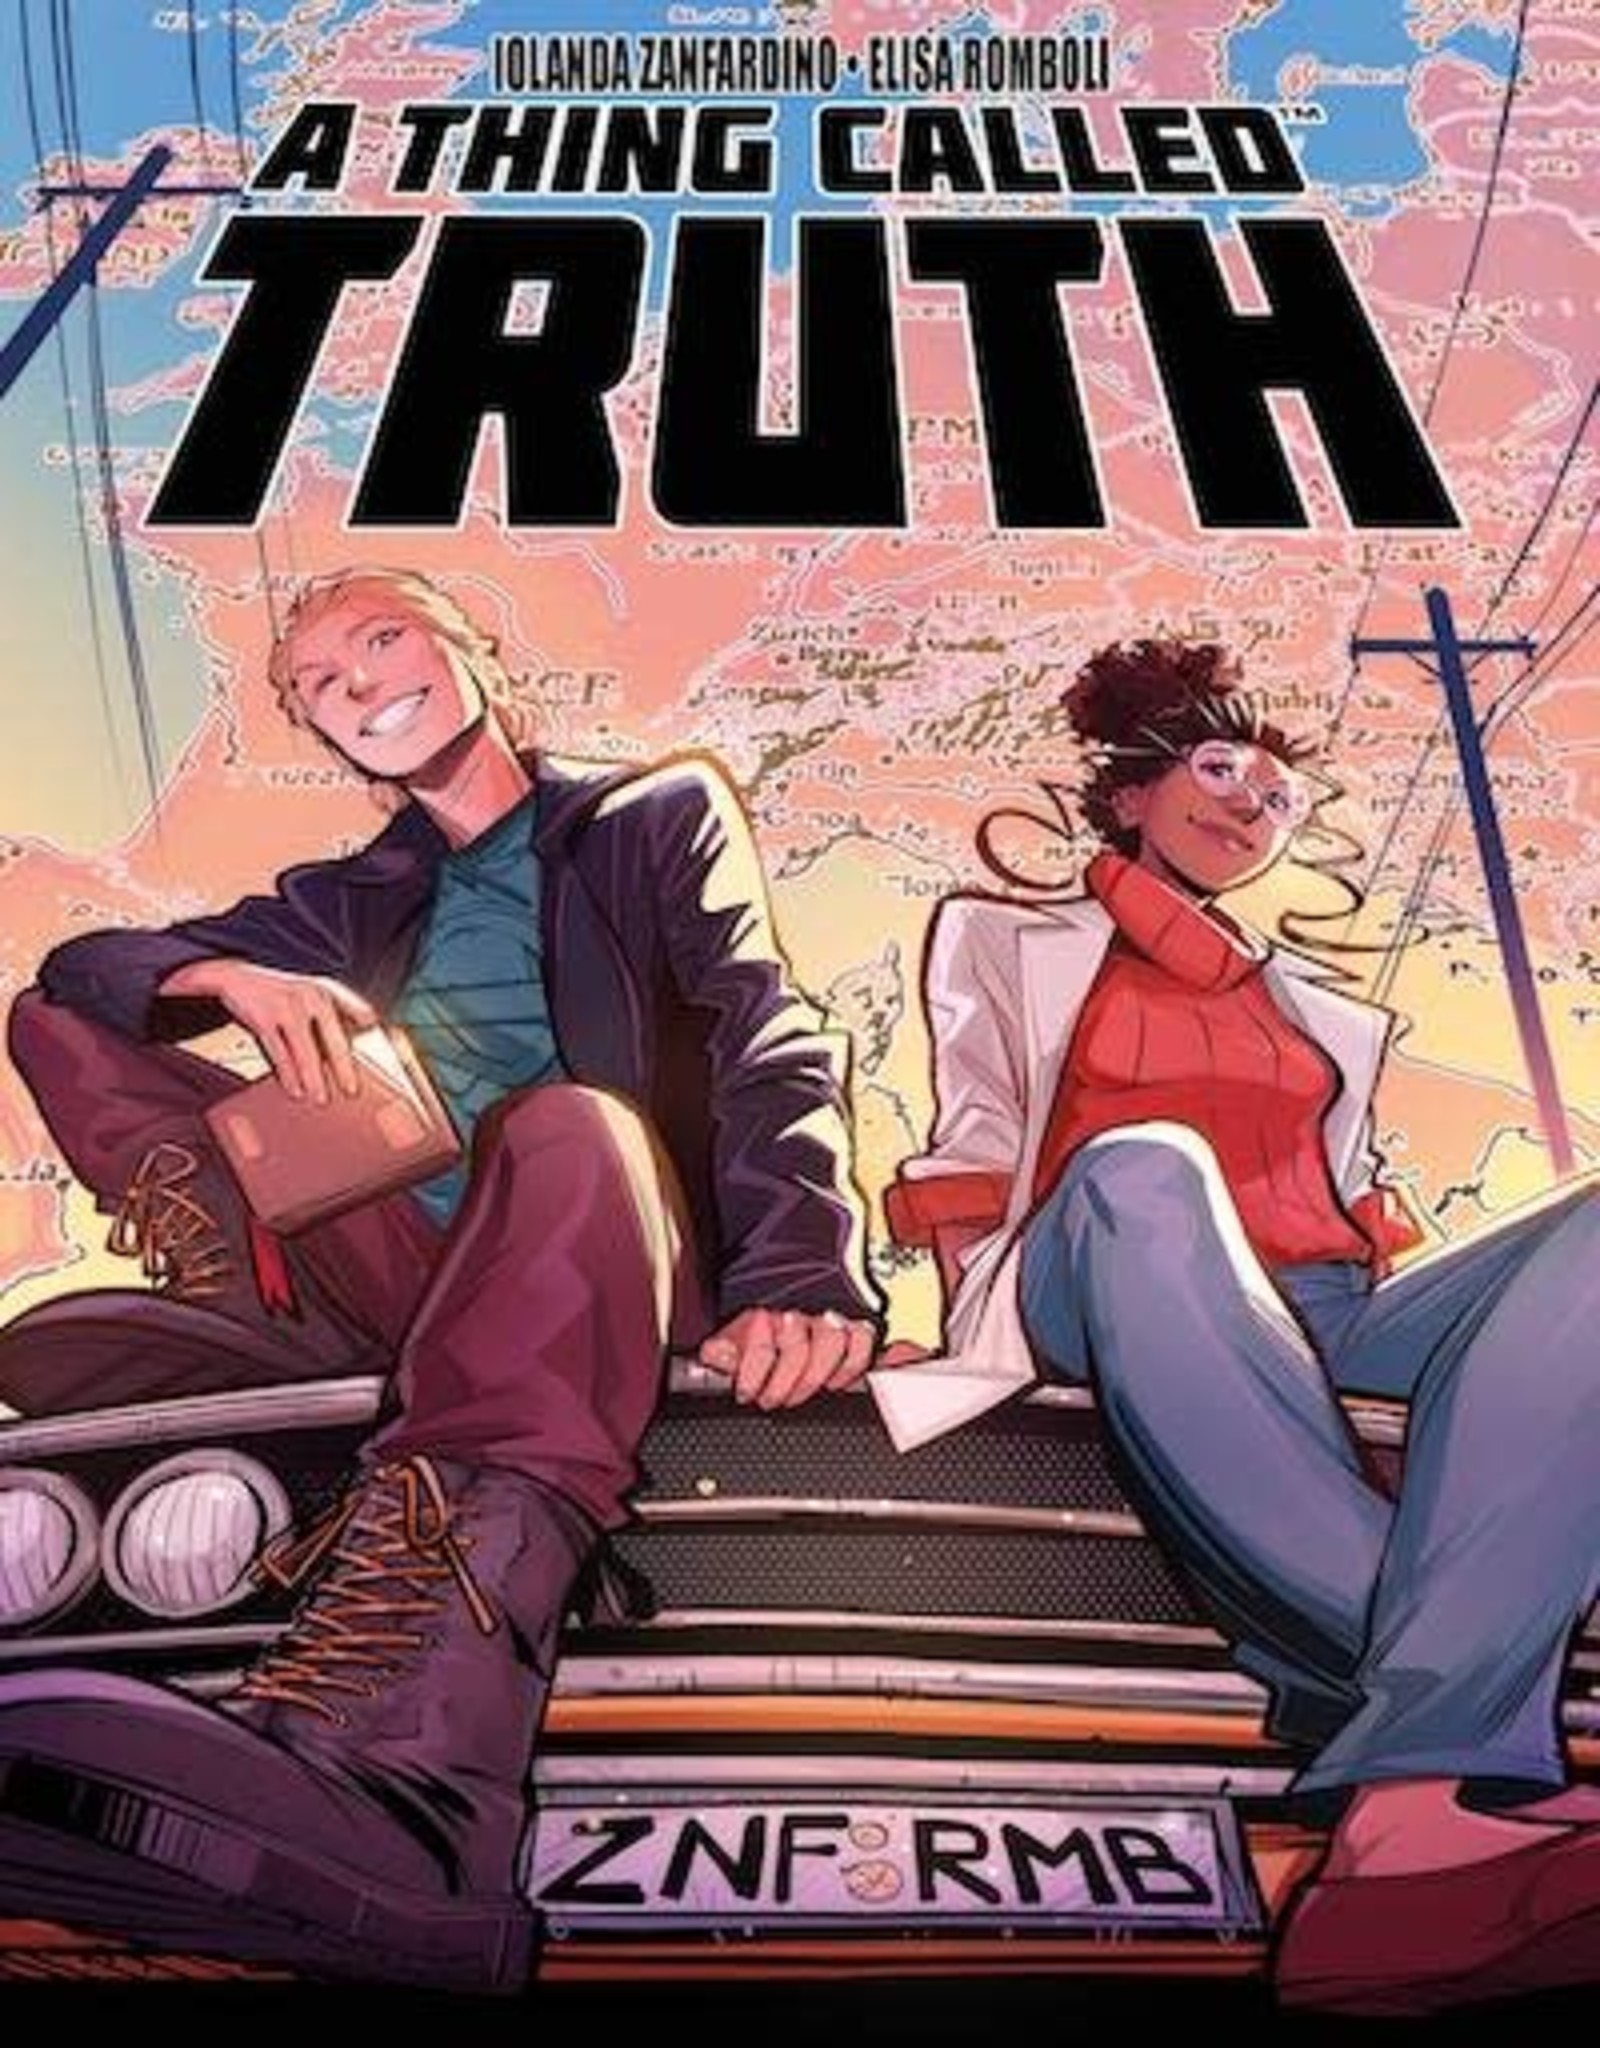 Image Comics A Thing Called Truth TP Vol 01